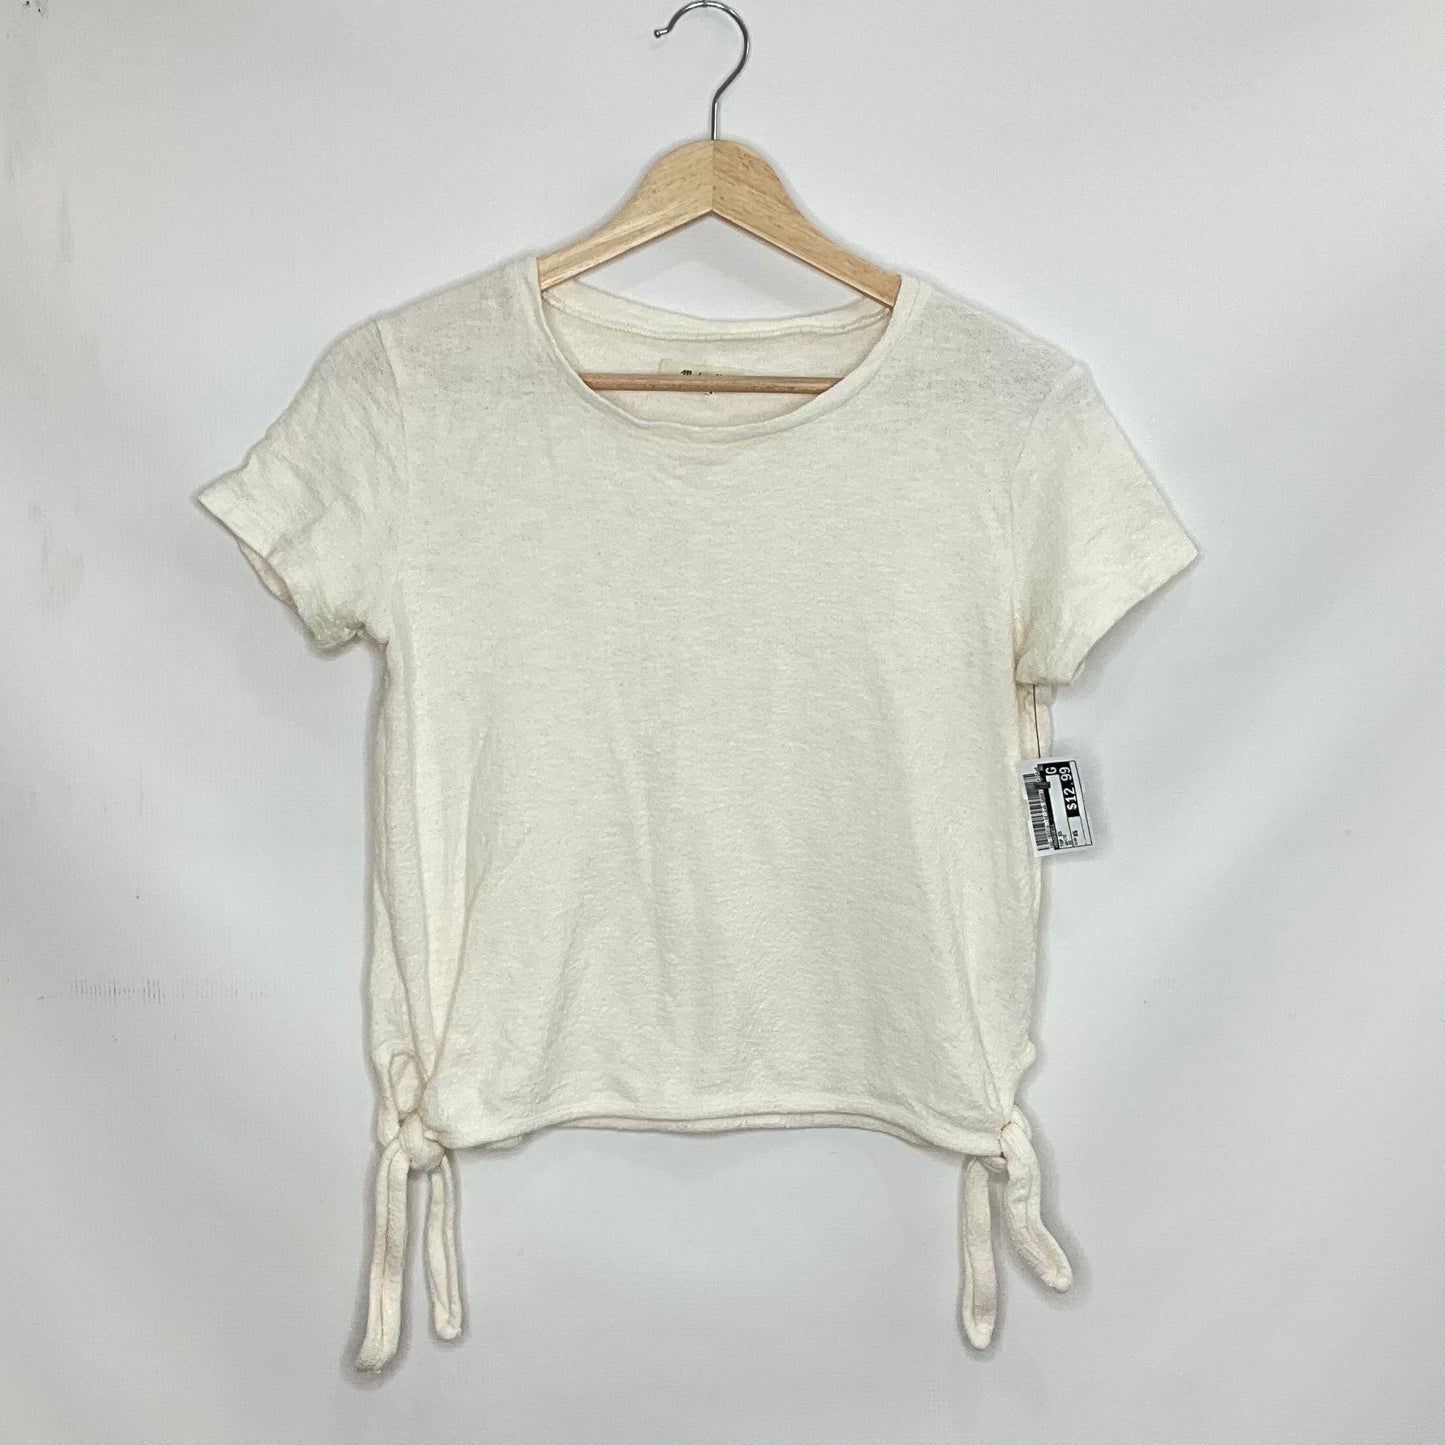 White Top Short Sleeve Madewell, Size Xs